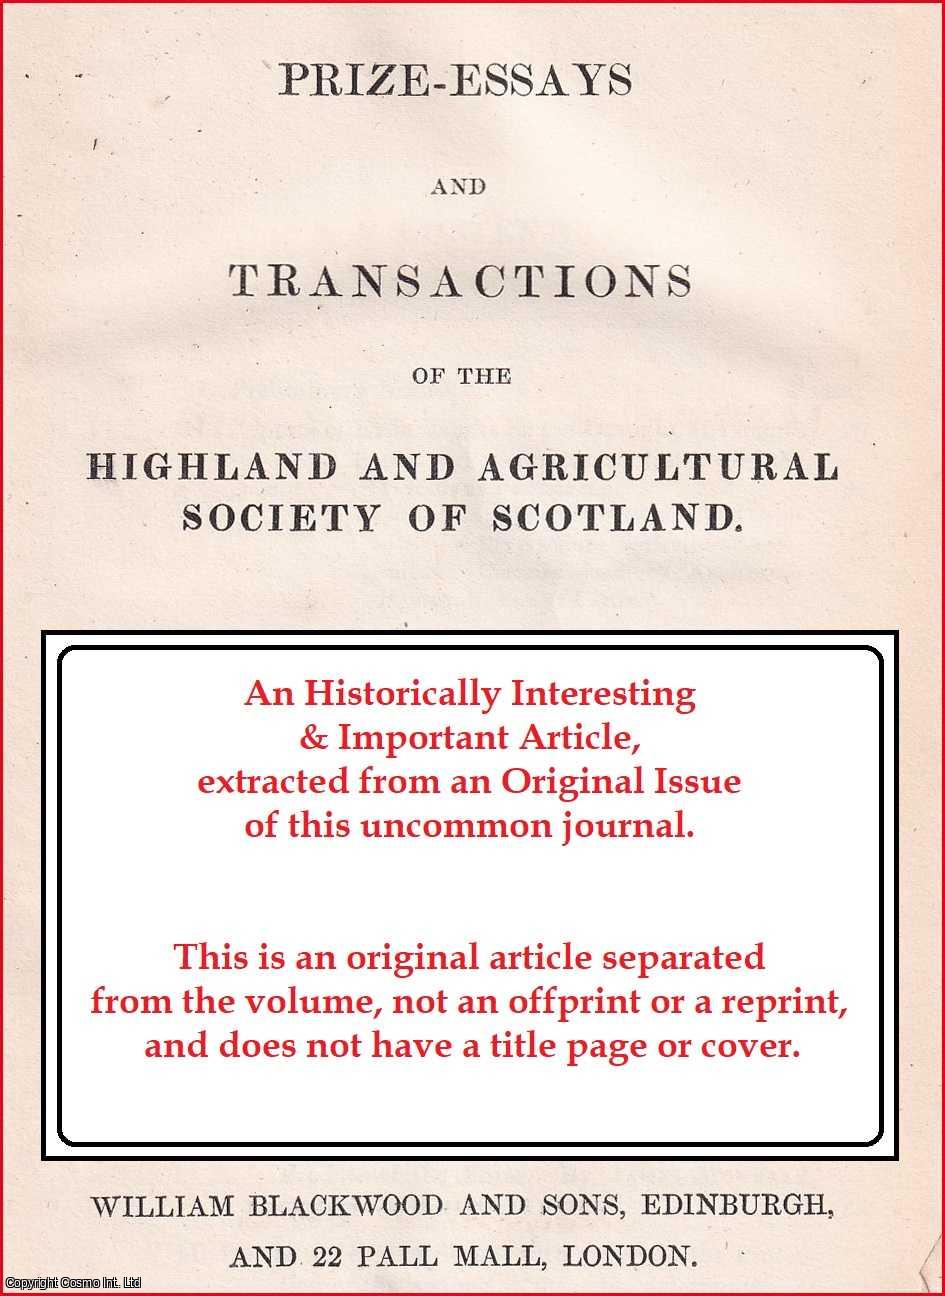 P.S. Vandergoes, President & Member of the Board of Agriculture, for South Holland. - The Meadows & Dairies of Holland. An uncommon original article from the Prize Essays and Transactions of the Highland Society of Scotland, 1829.